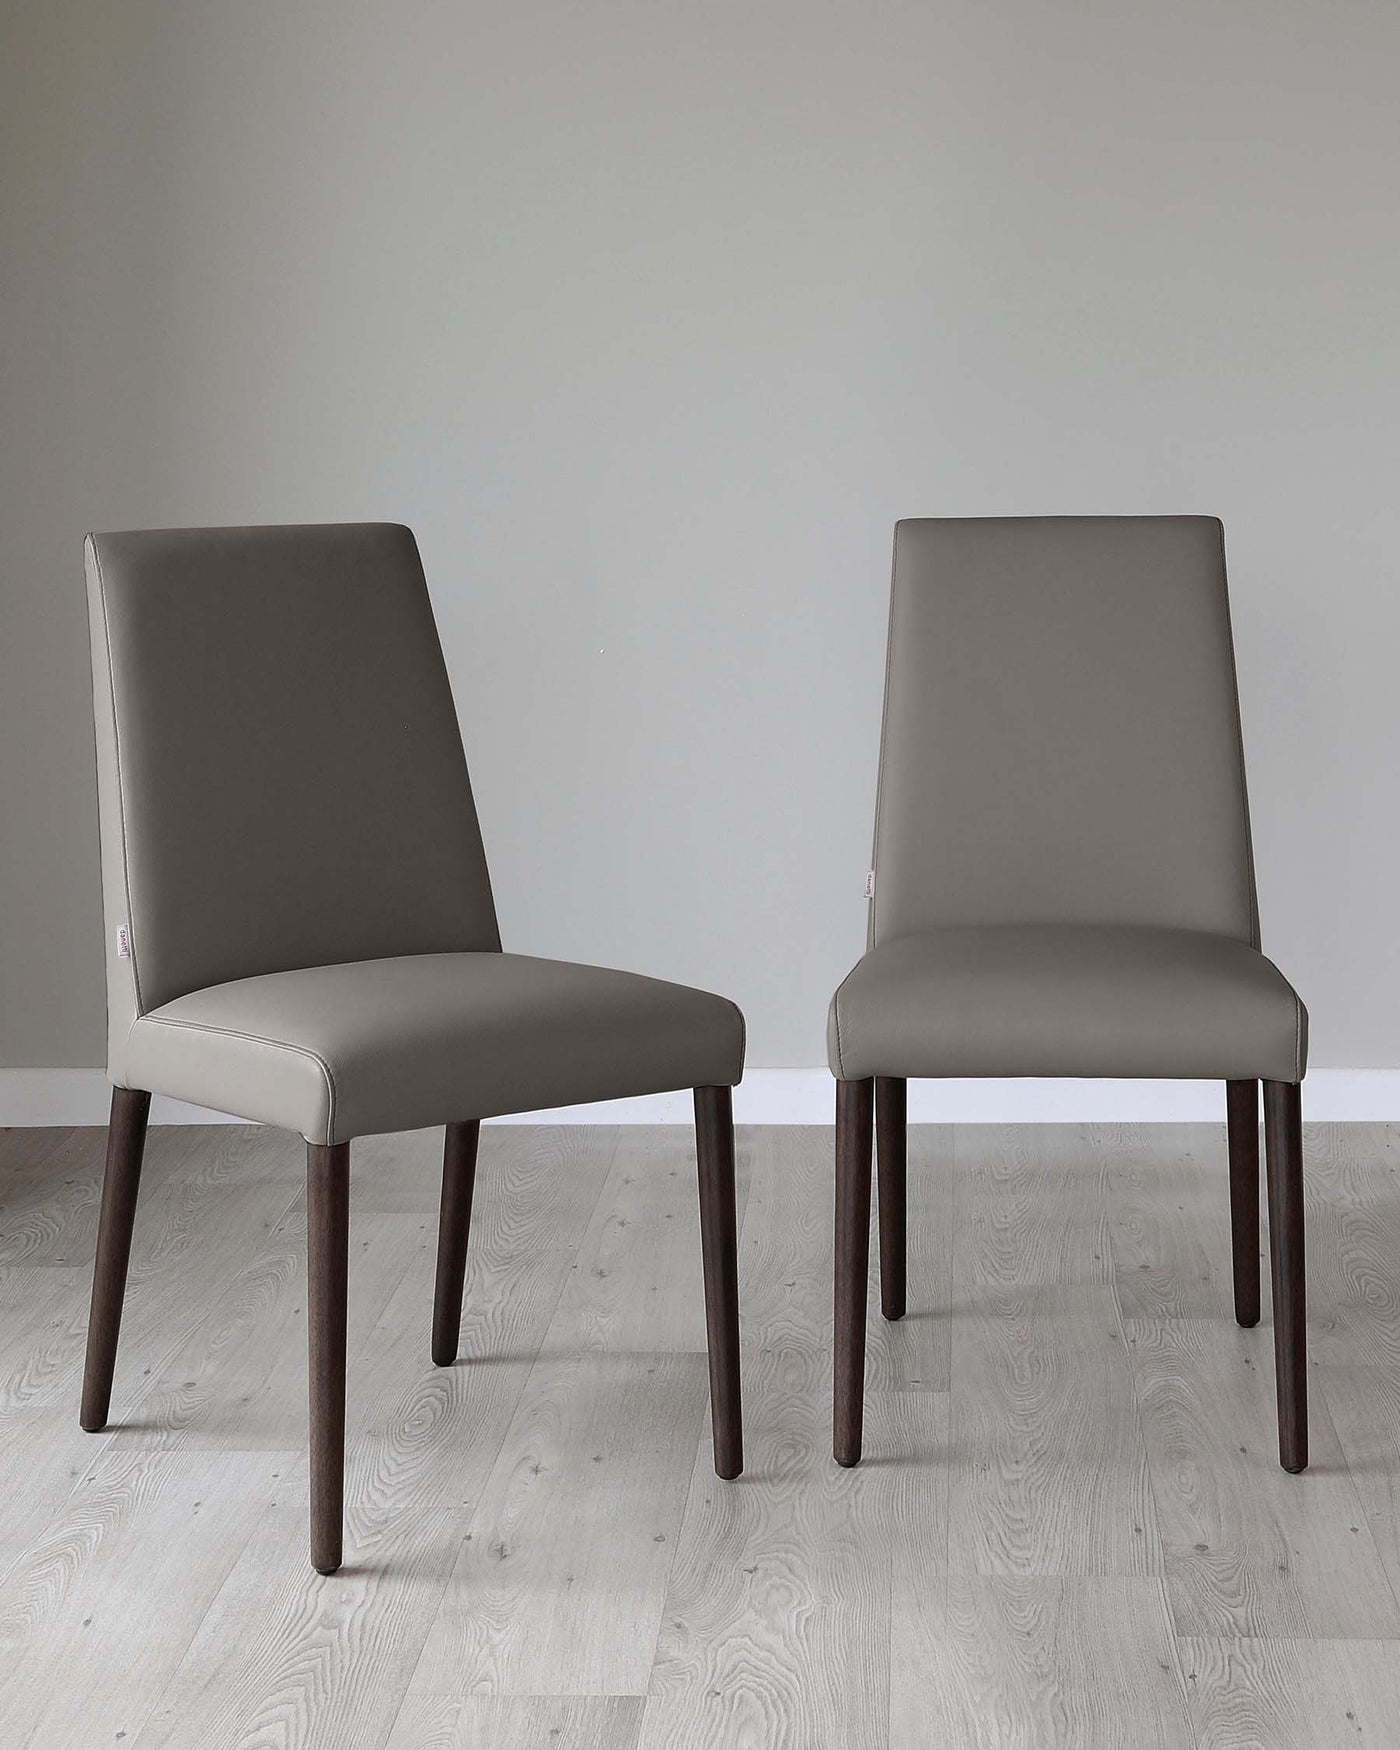 Two modern dining chairs with sleek, taupe upholstery and dark wooden legs, standing on a light wood floor against a soft grey background.